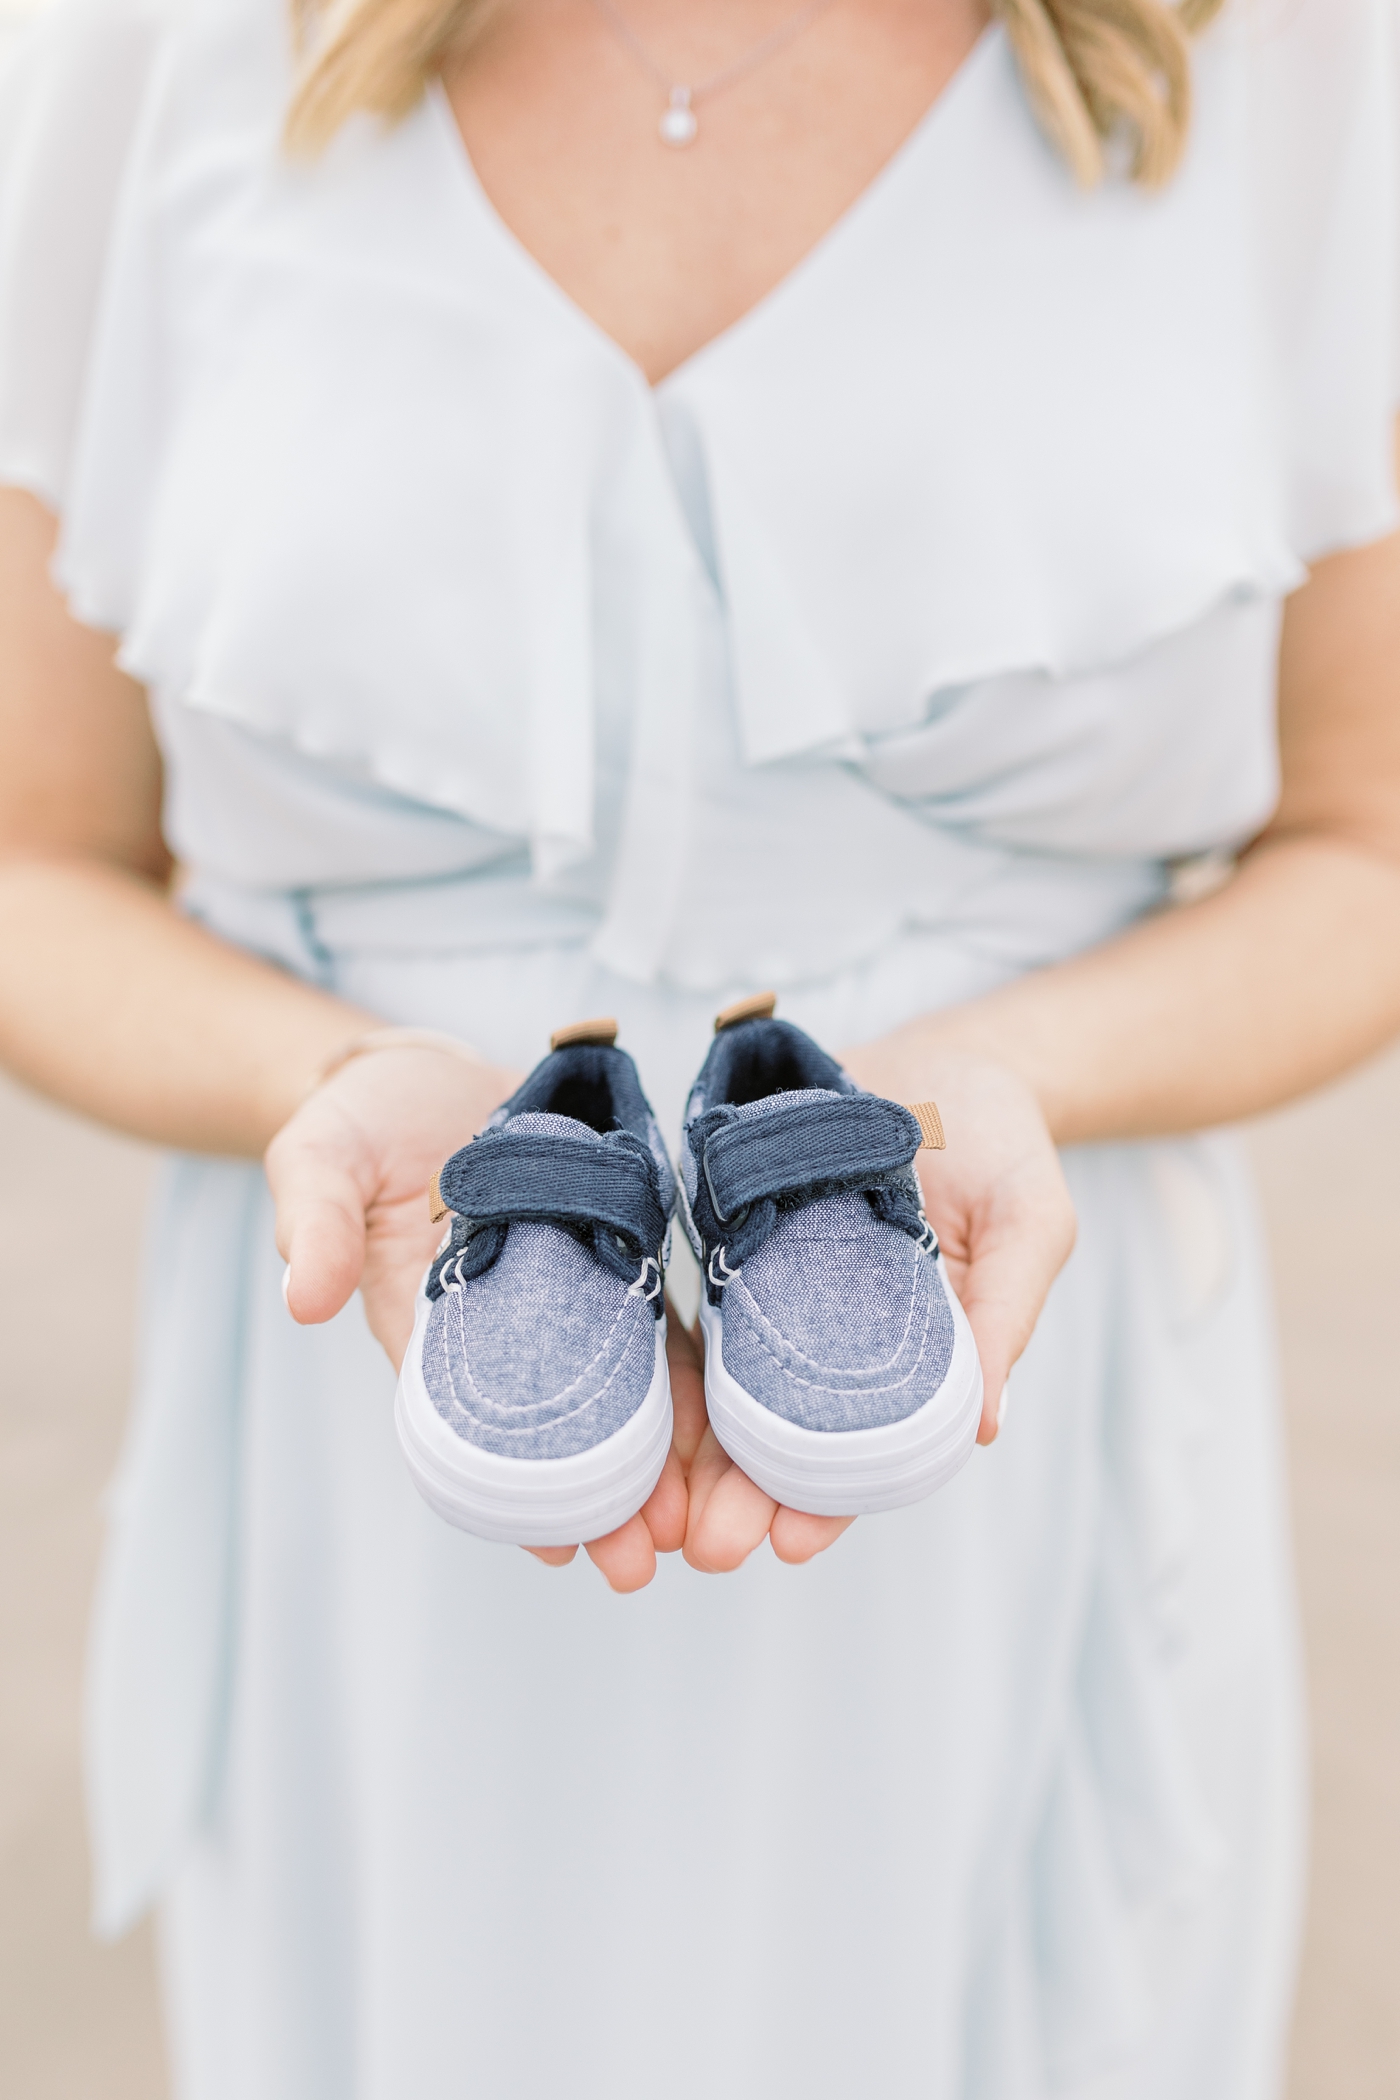 Gender reveal photo of Mom holding blue baby shoes. Photo by Caitlyn Motycka Photography.